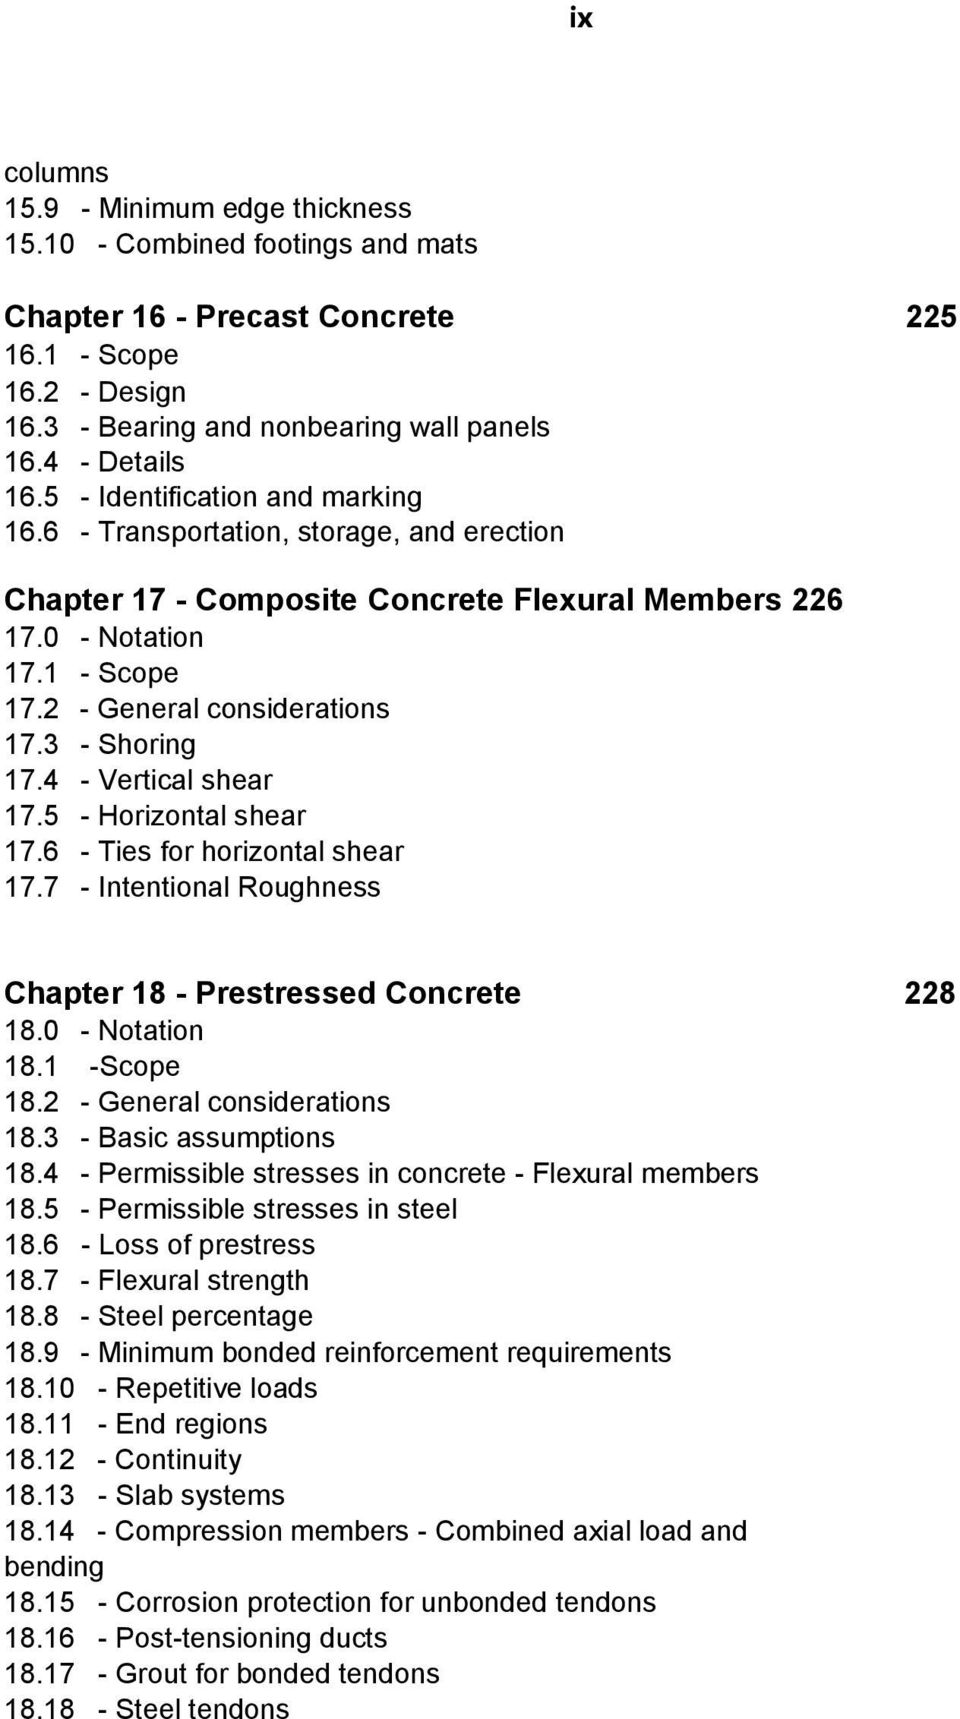 3 - Shoring 17.4 - Vertical shear 17.5 - Horizontal shear 17.6 - Ties for horizontal shear 17.7 - Intentional Roughness Chapter 18 - Prestressed Concrete 228 18.0 - Notation 18.1 -Scope 18.